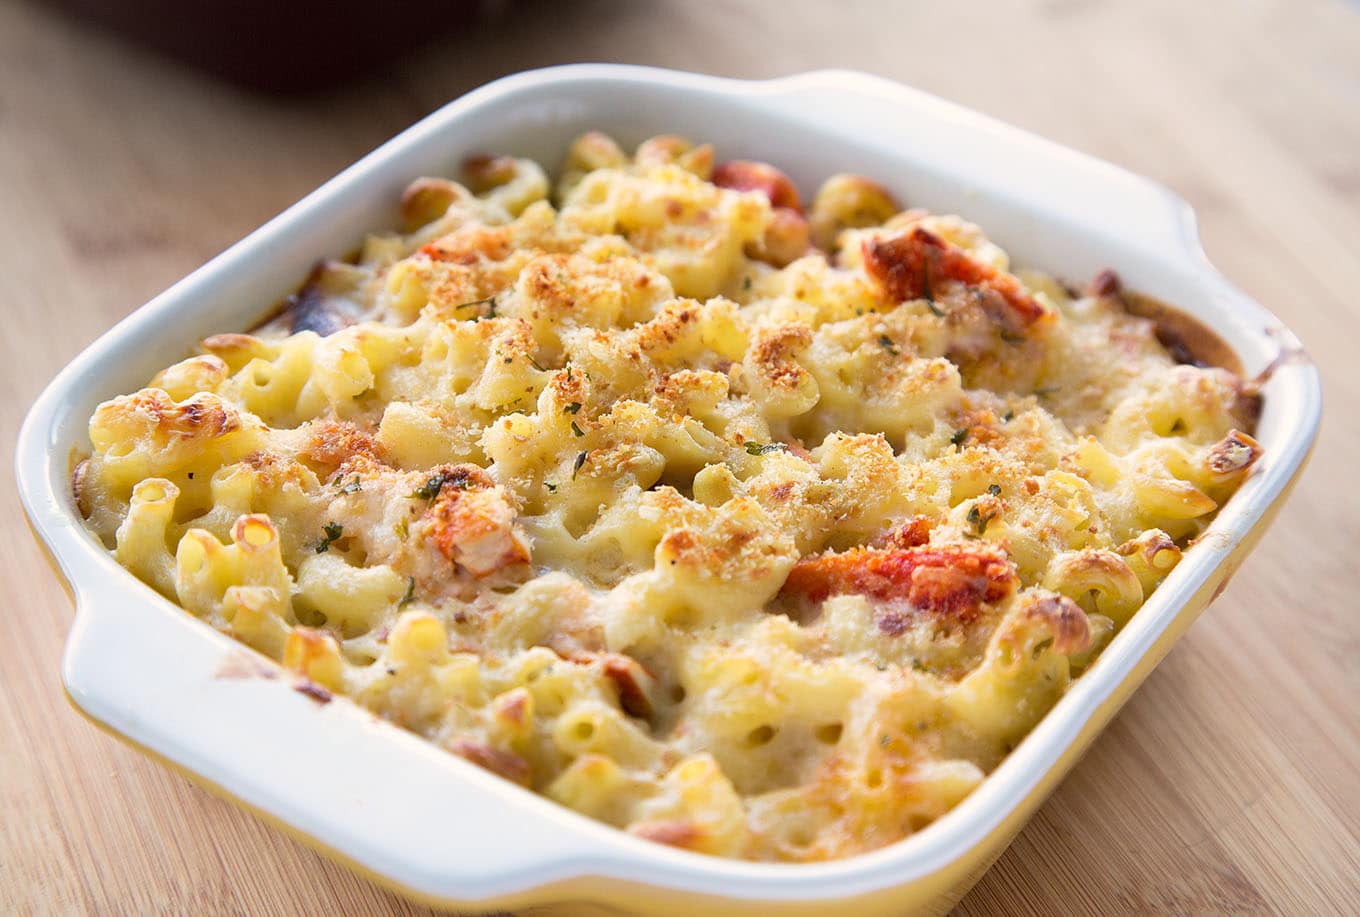 White cheddar Lobster mac and cheese